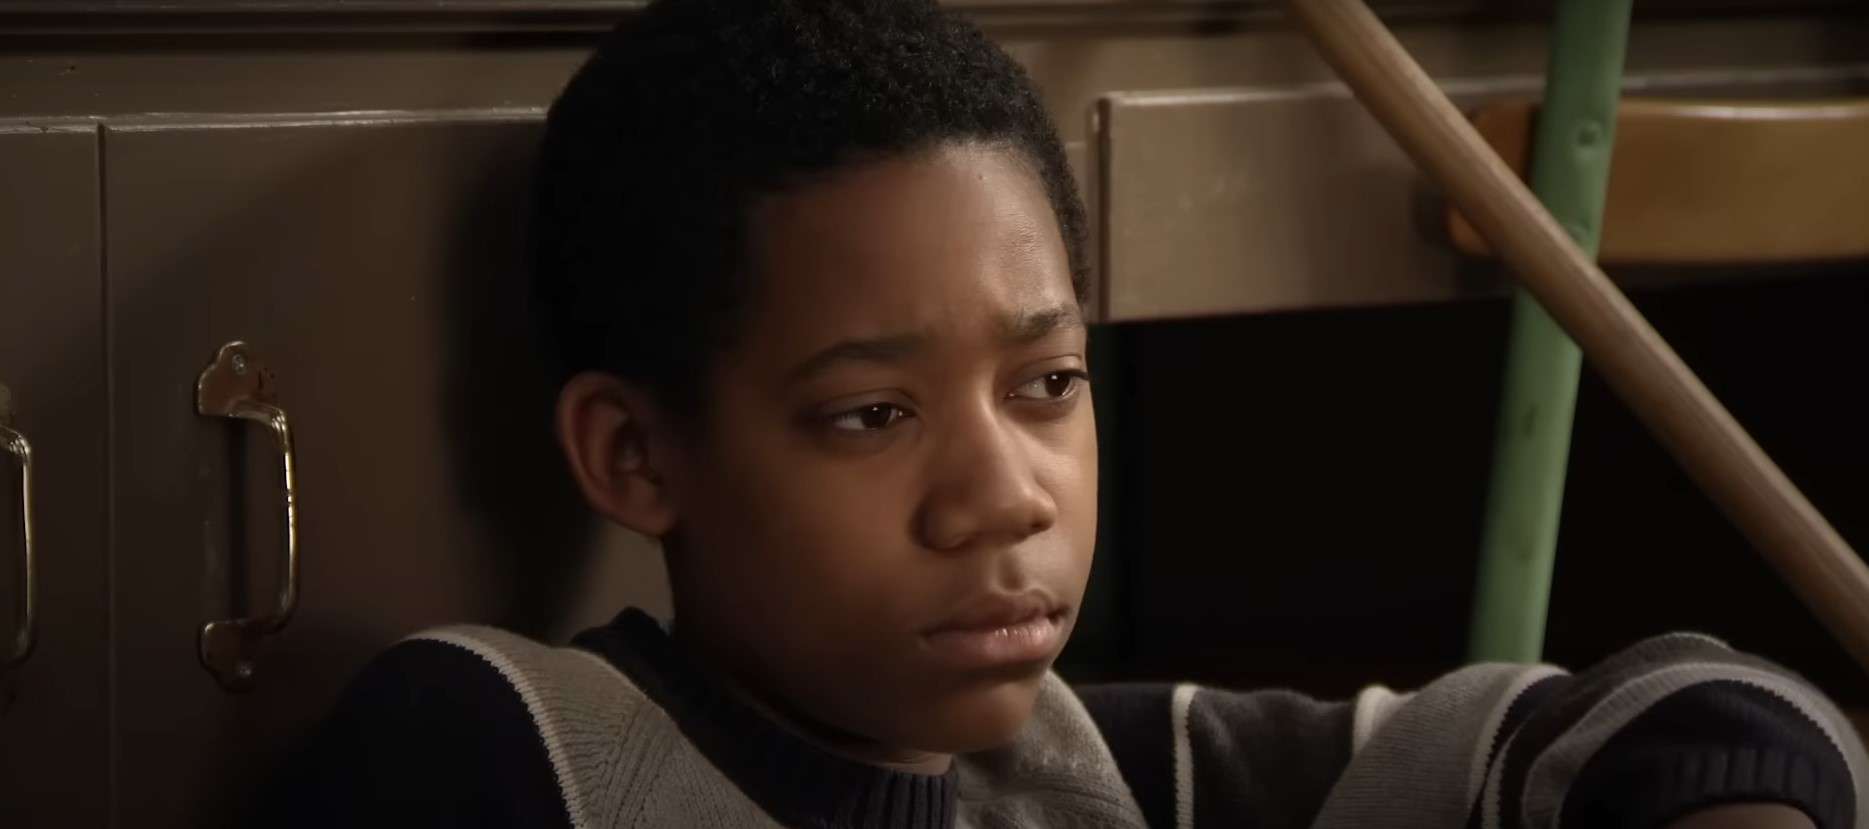 Why Did Everybody Hates Chris End?